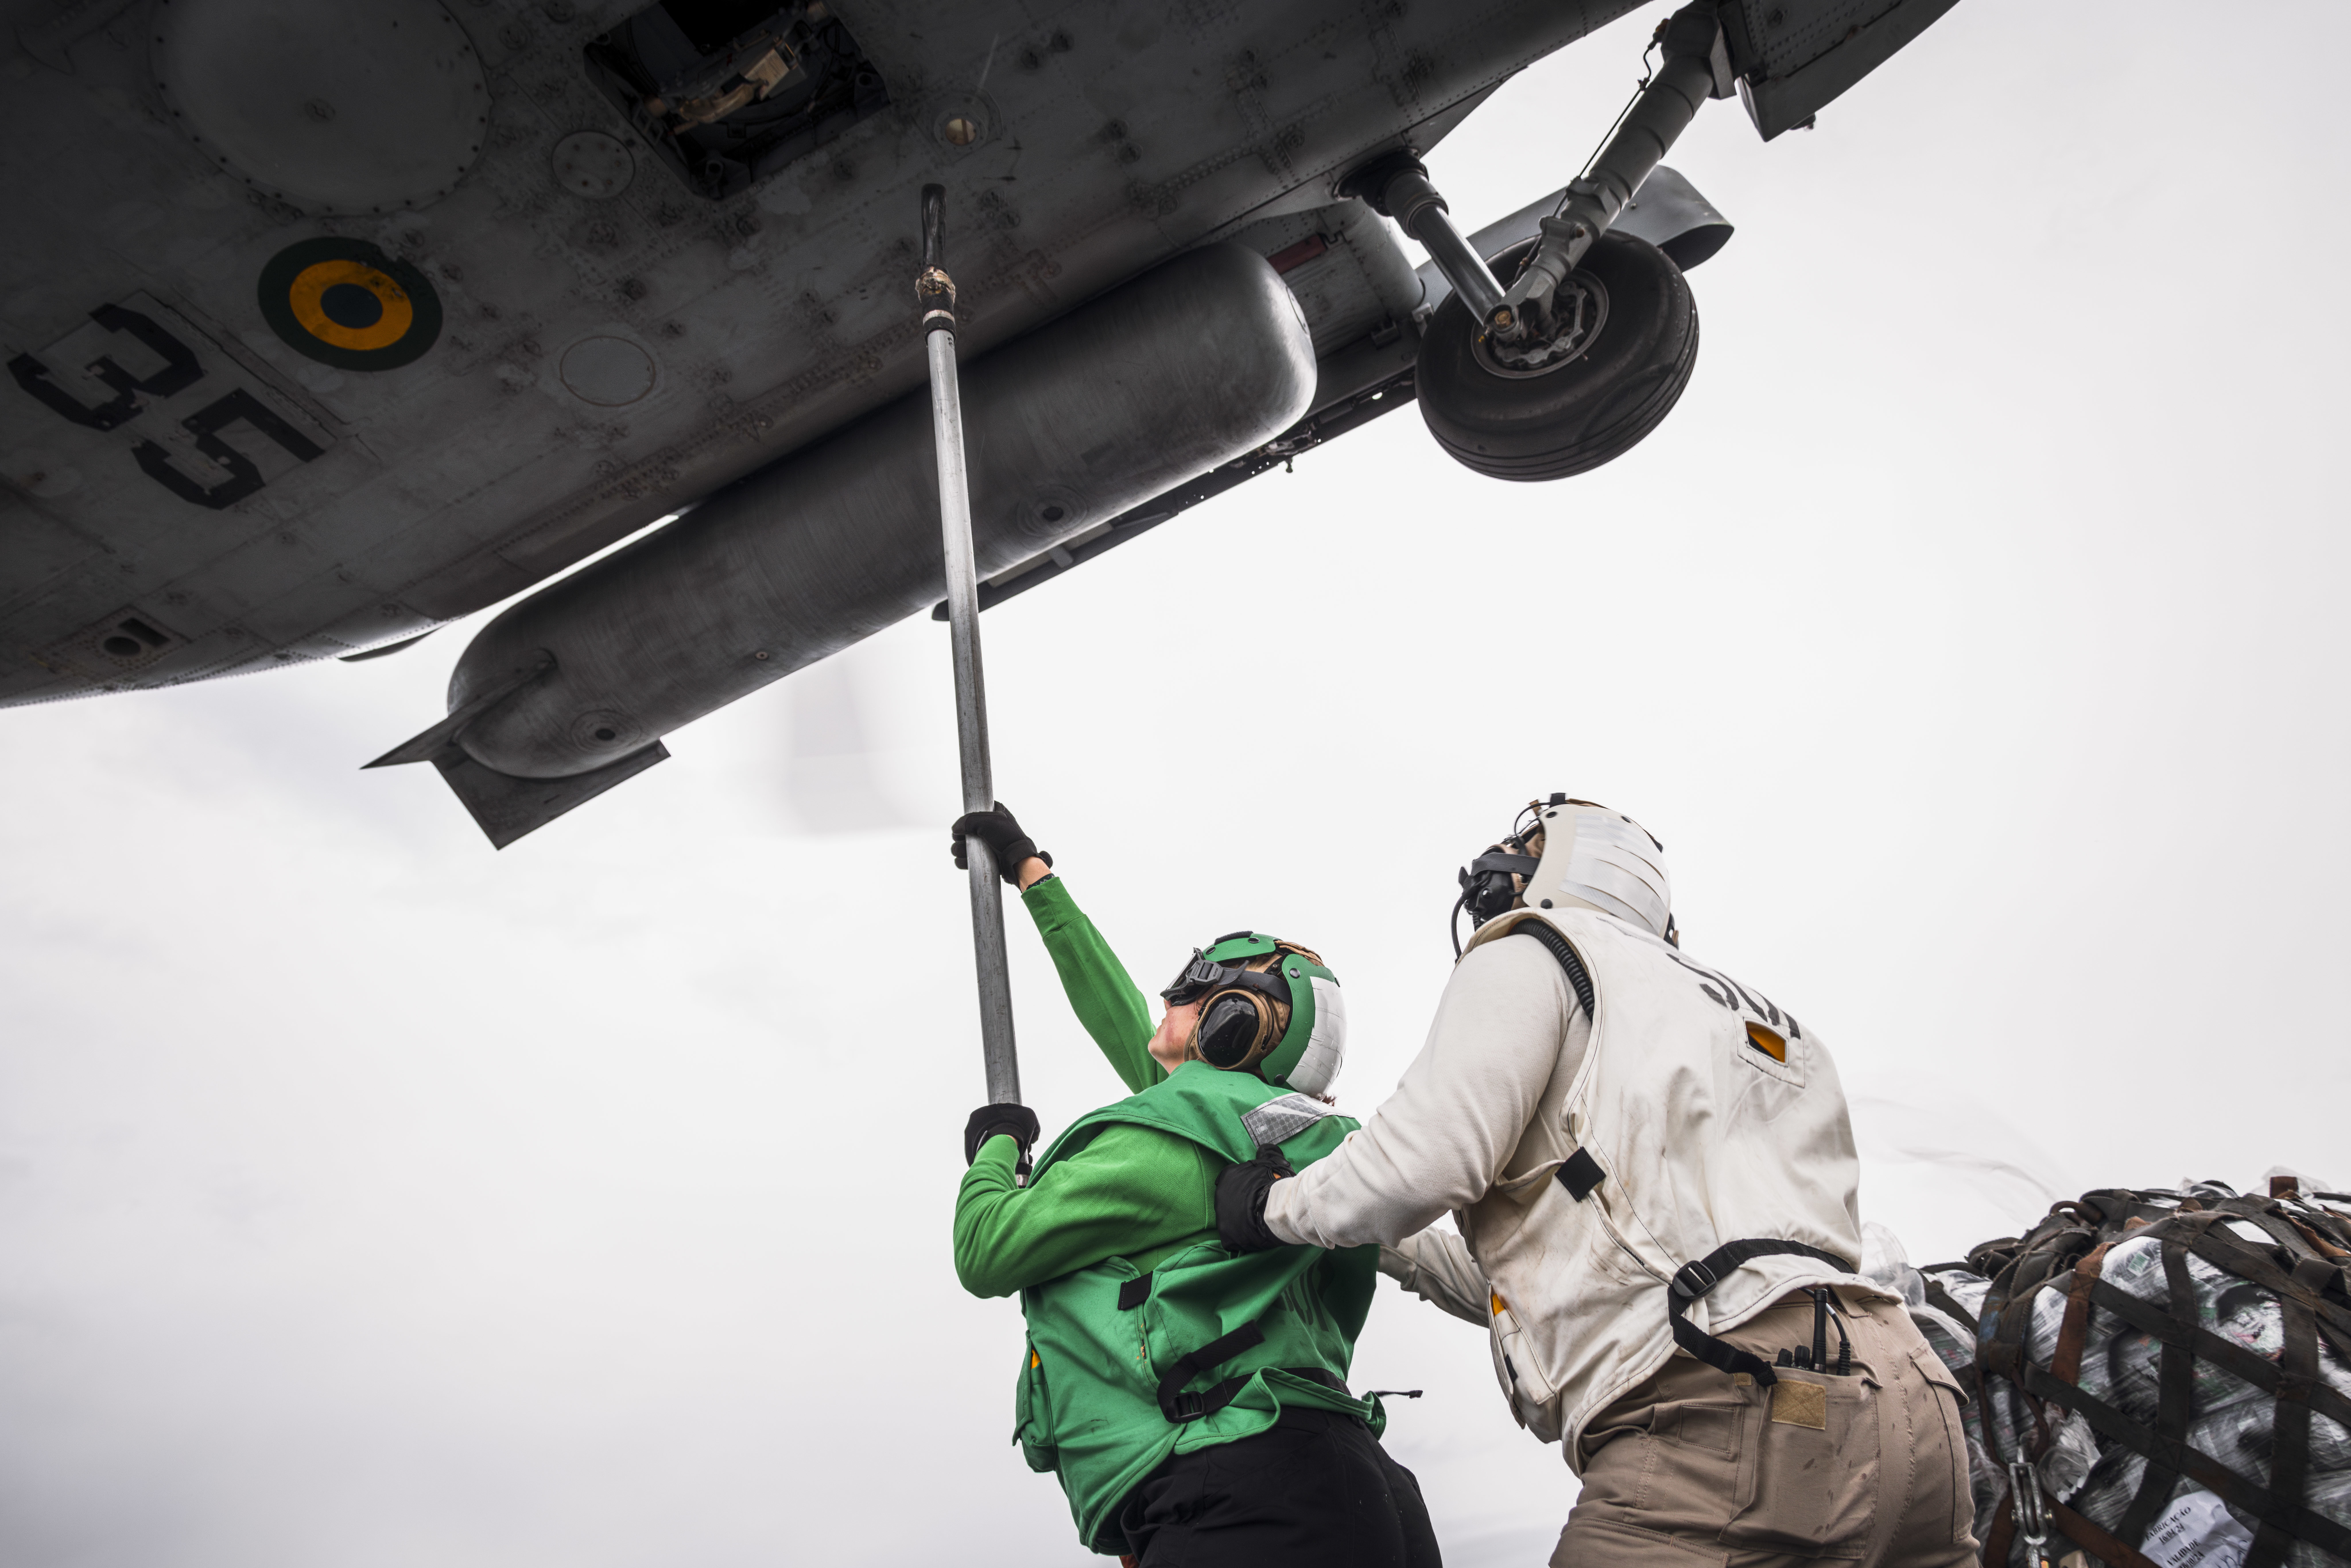 Sailors hook supplies onto a Brazilian navy helicopter aboard USS George Washington (CVN 73) during a vertical replenishment with the Brazilian navy.